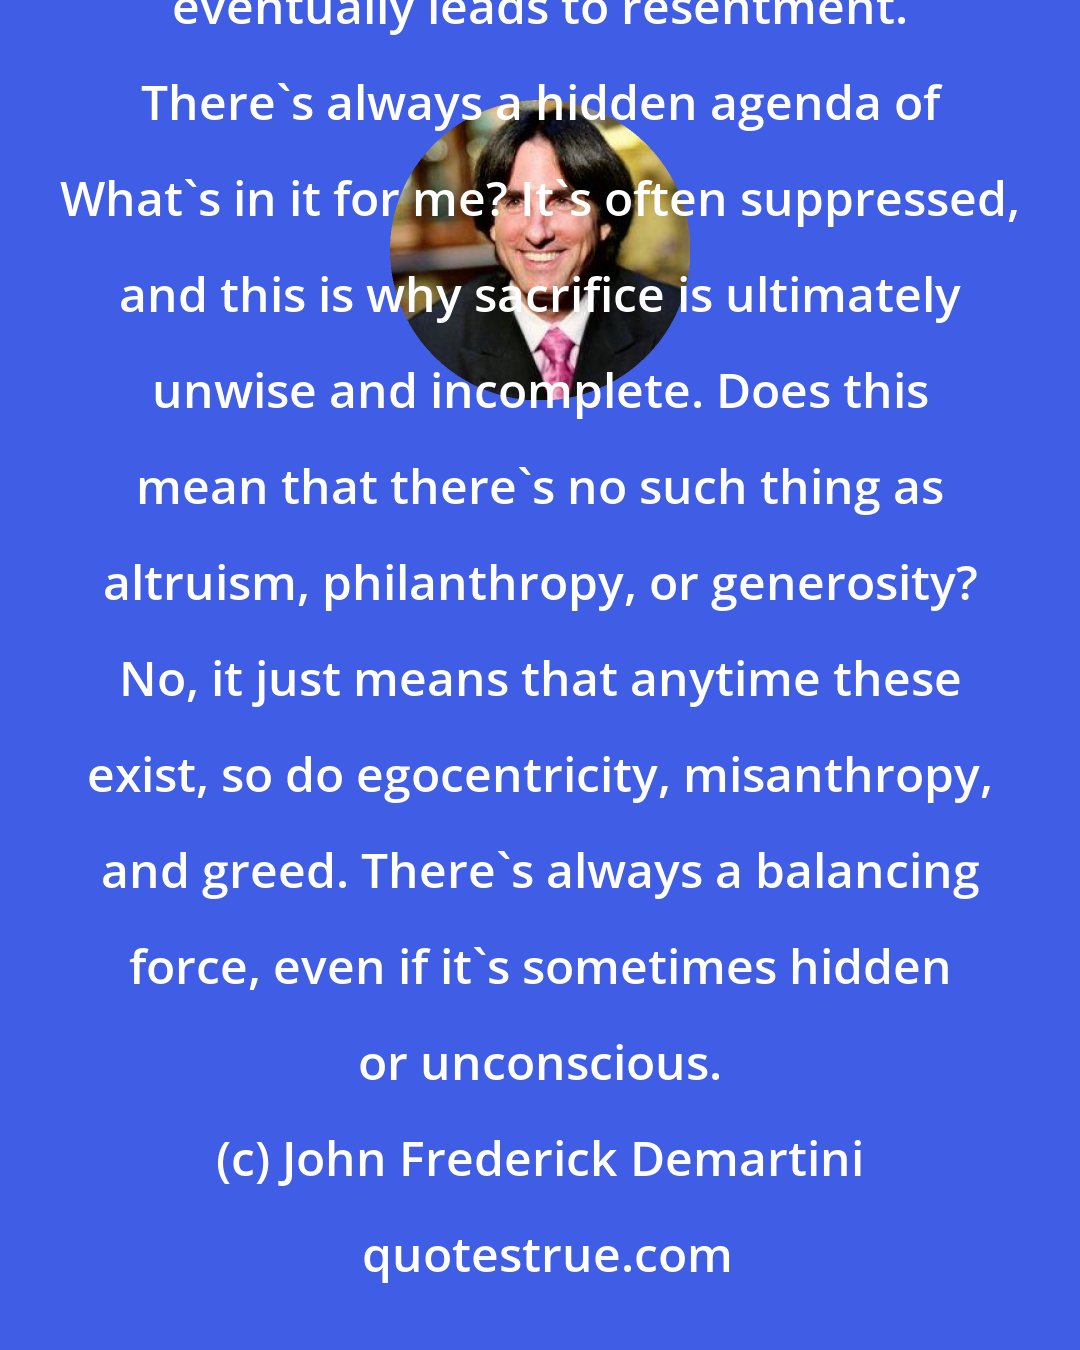 John Frederick Demartini: I don't care if you're a parent giving to a child, a worker to a company, or a romantic to a lover, this behavior eventually leads to resentment. There's always a hidden agenda of What's in it for me? It's often suppressed, and this is why sacrifice is ultimately unwise and incomplete. Does this mean that there's no such thing as altruism, philanthropy, or generosity? No, it just means that anytime these exist, so do egocentricity, misanthropy, and greed. There's always a balancing force, even if it's sometimes hidden or unconscious.